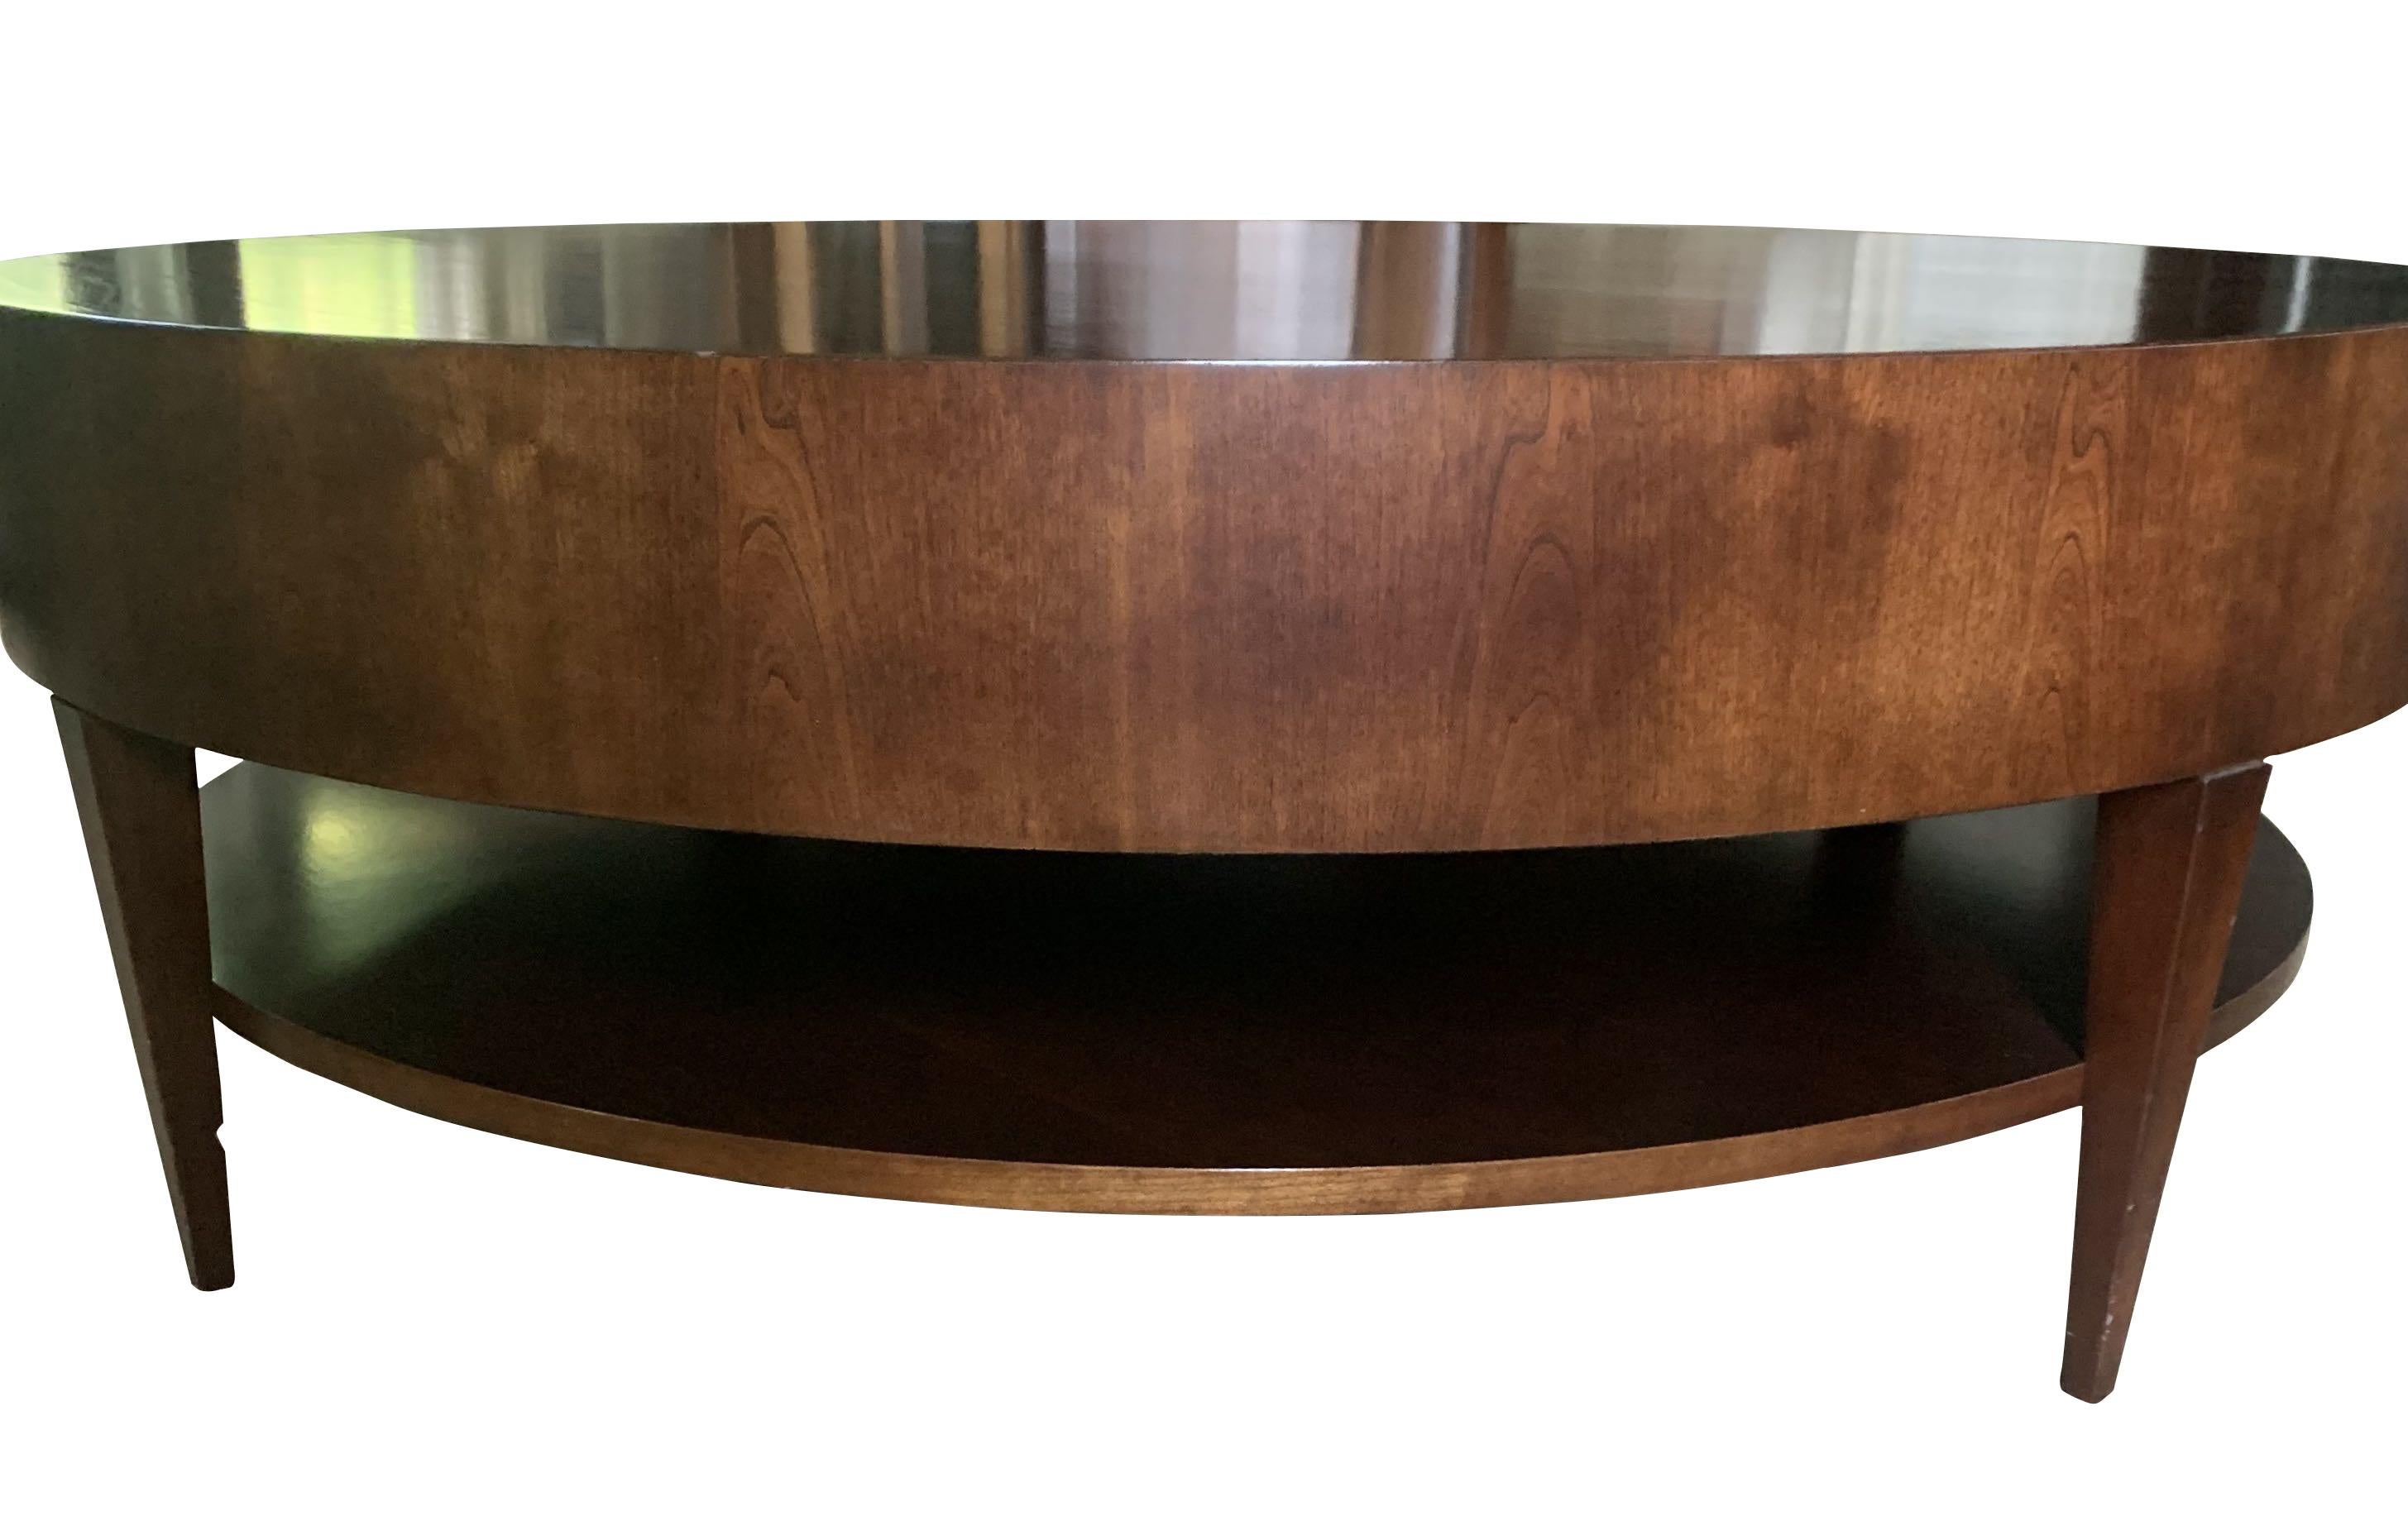 United States 1980s round birch wood coffee table.
This coffee table has two tiers.
The thick top tier is a solid round block of wood.
It is simple and elegant in design.


 